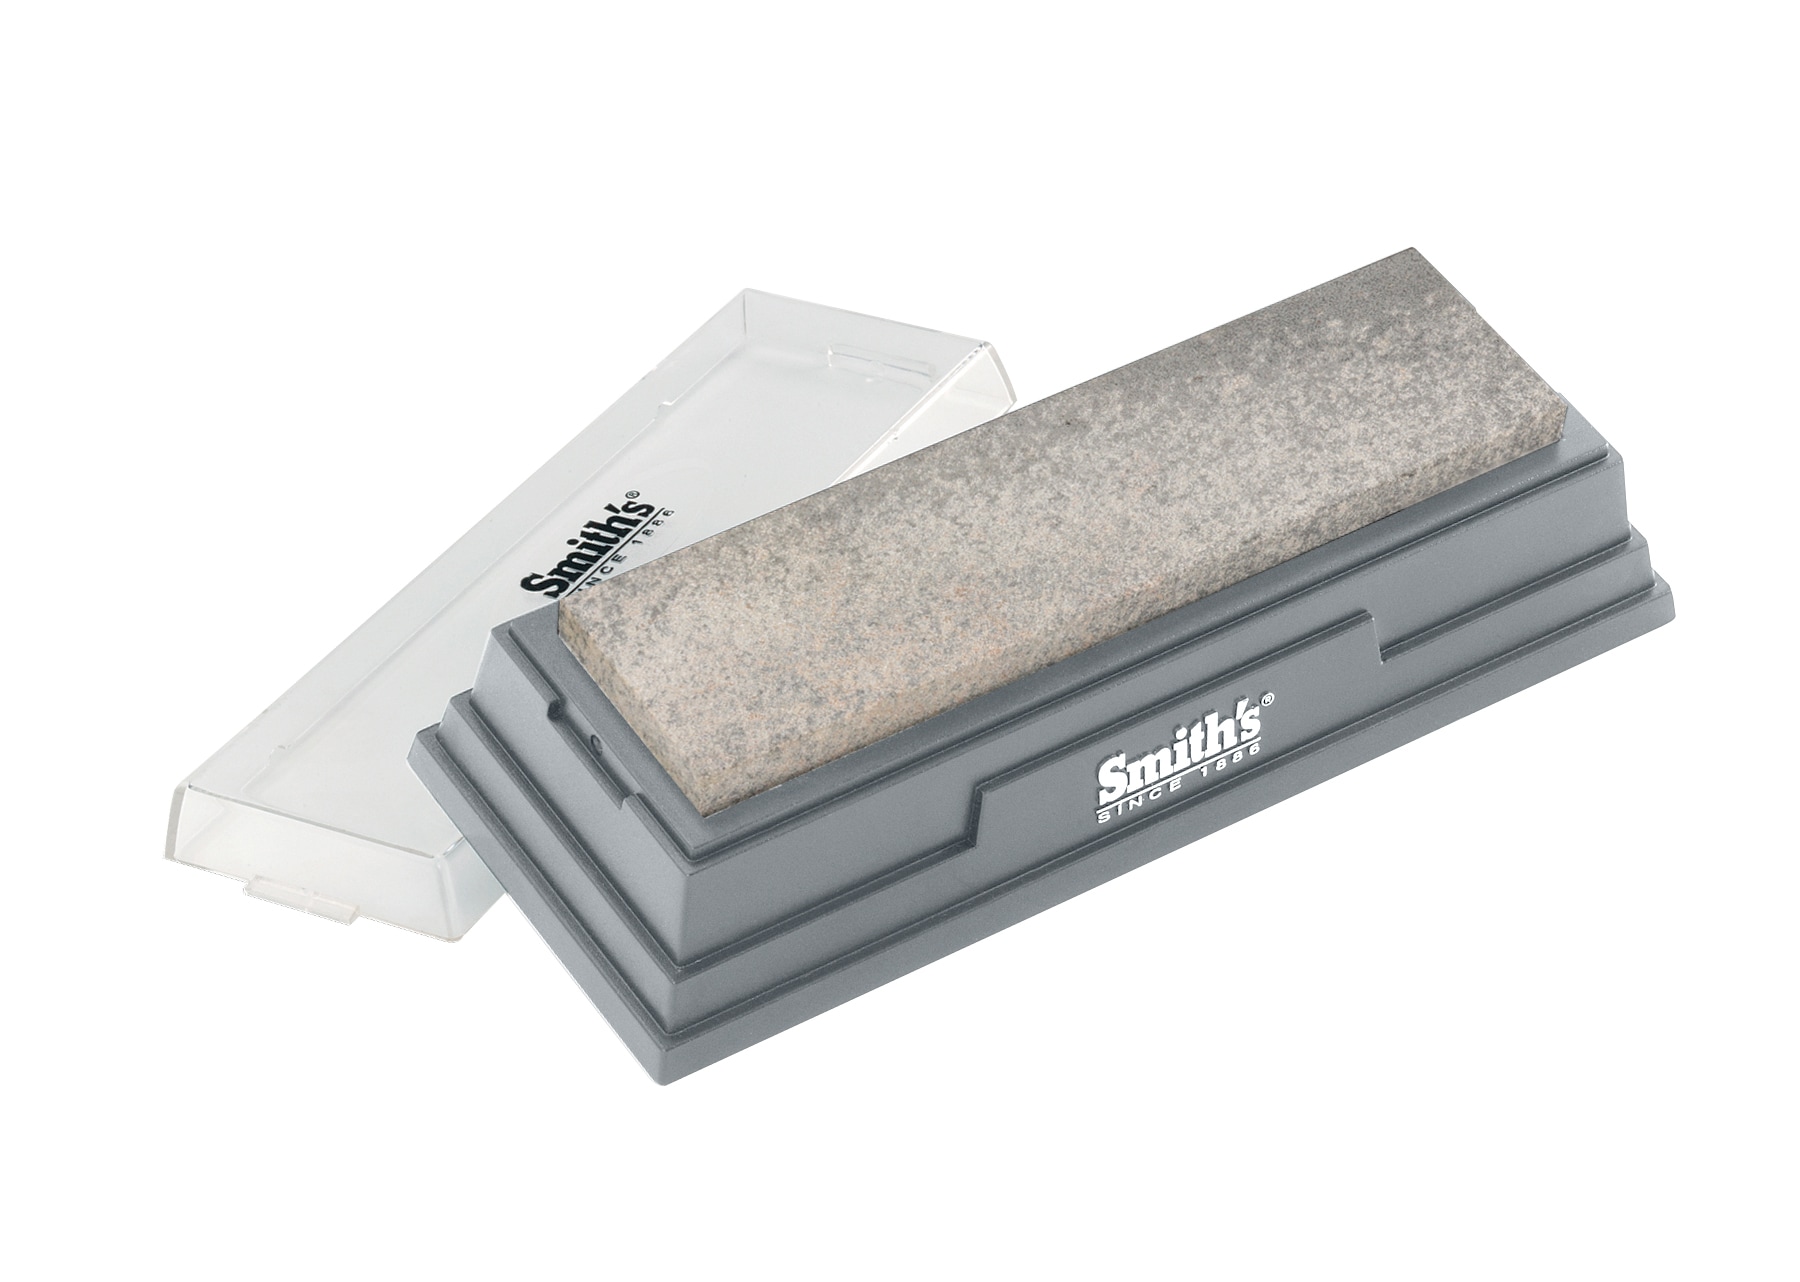 Smith's 6-in Natural Arkansas Bench Stone in the Sharpeners